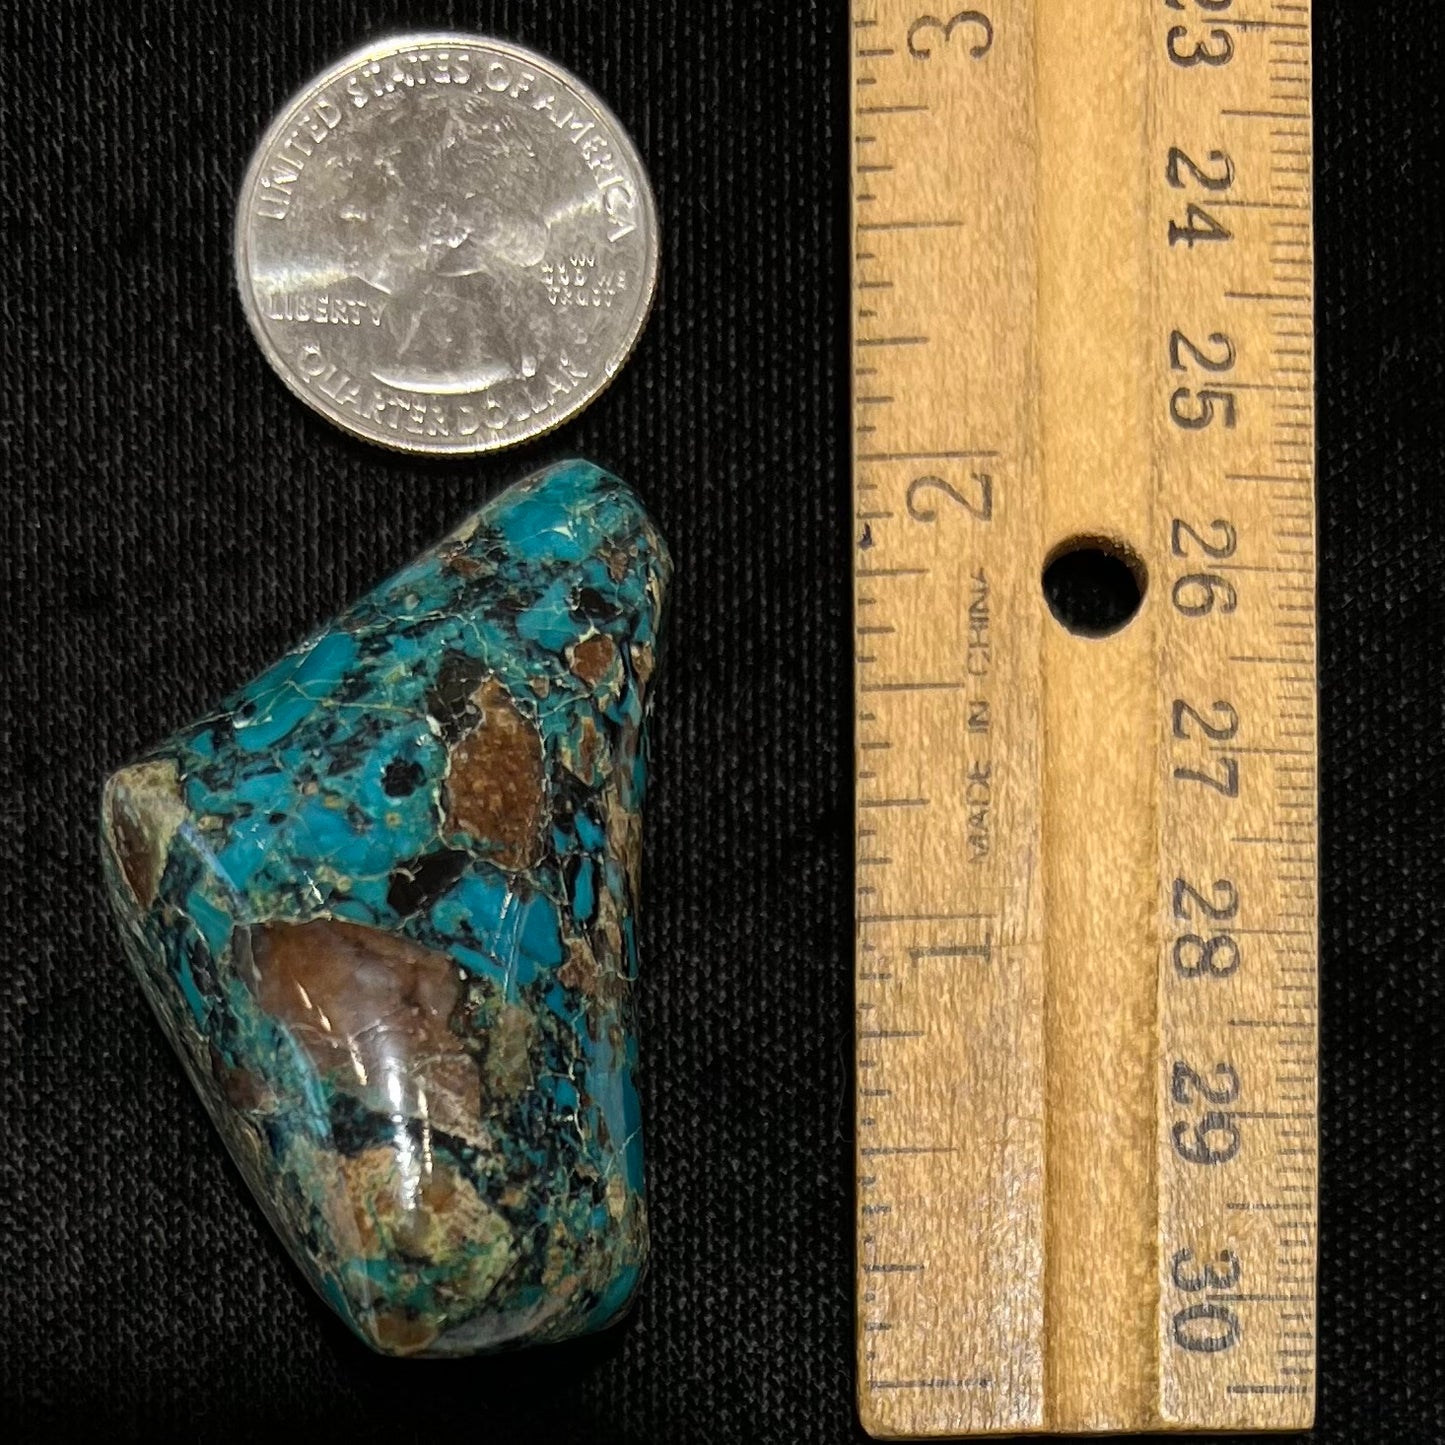 A loose polished chrysocolla stone with malachite inclusions.